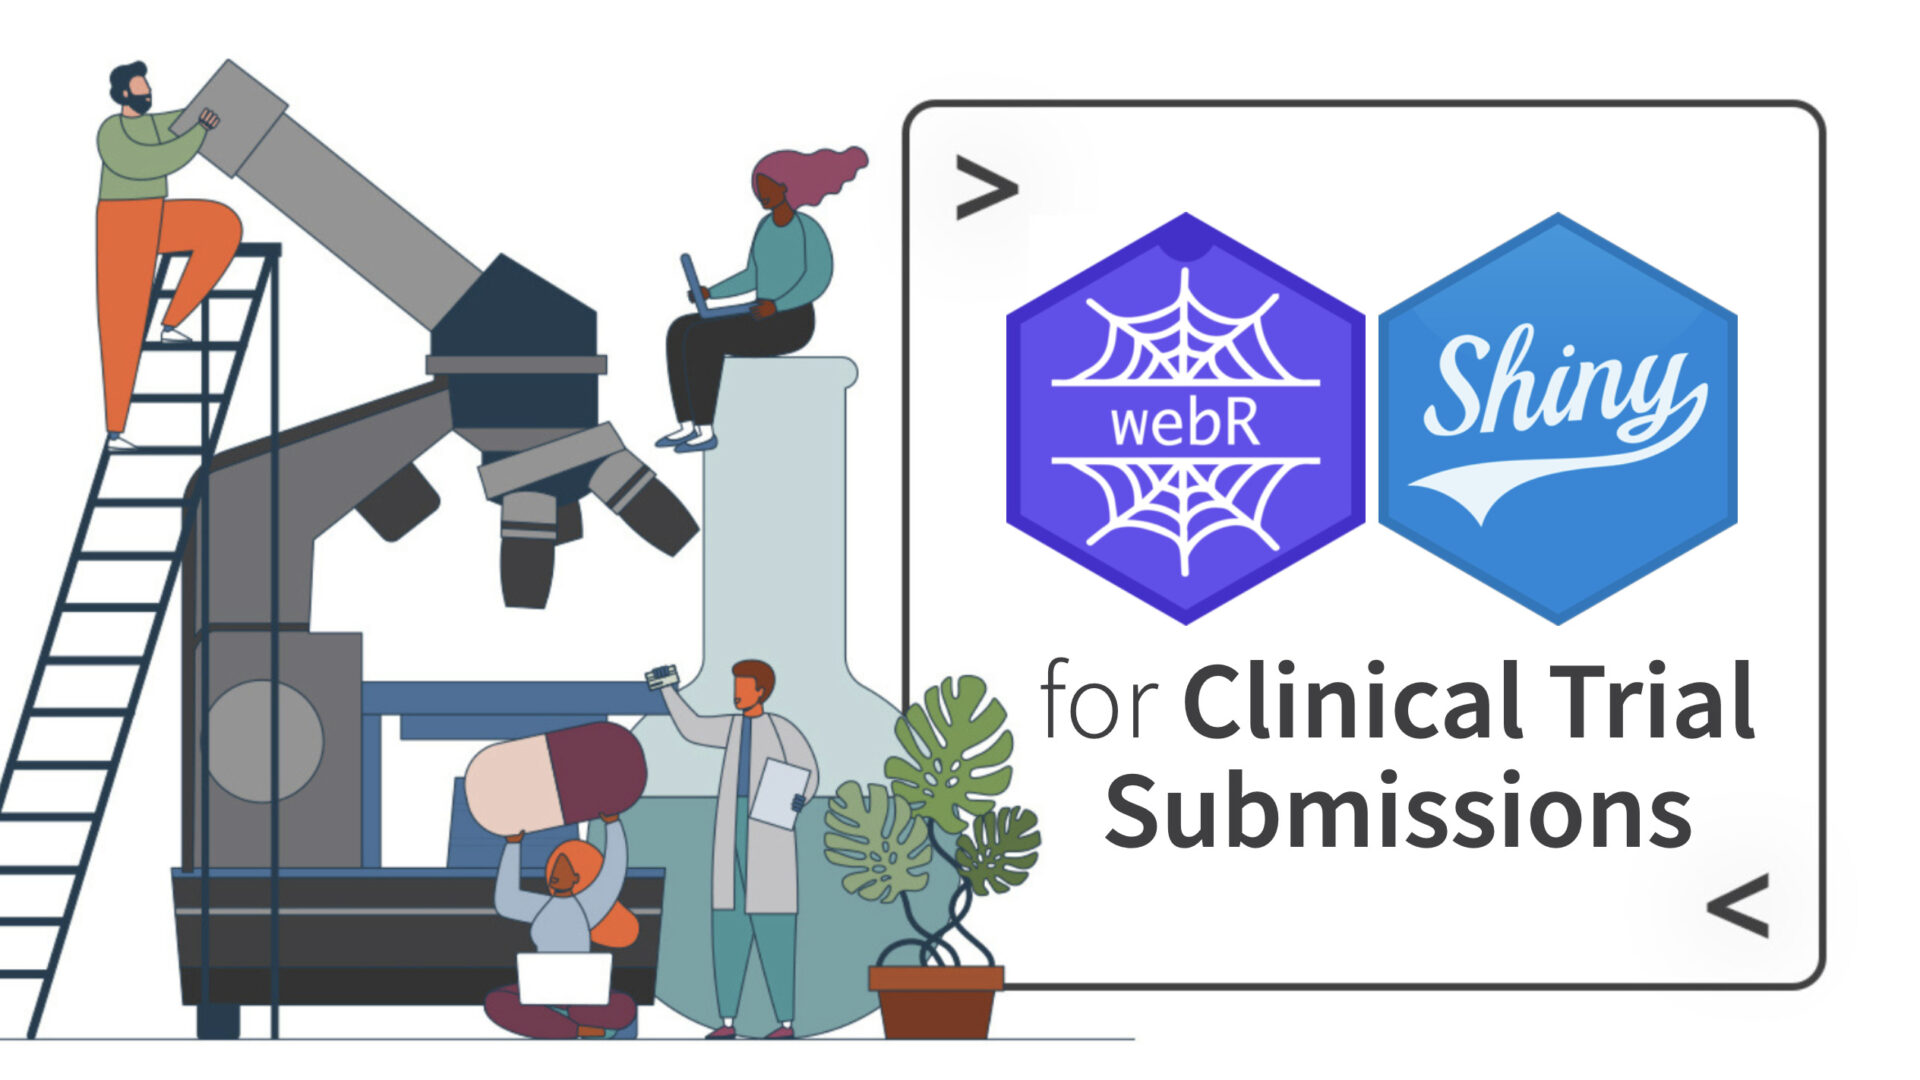 webR and Shiny for clinical trial submissions